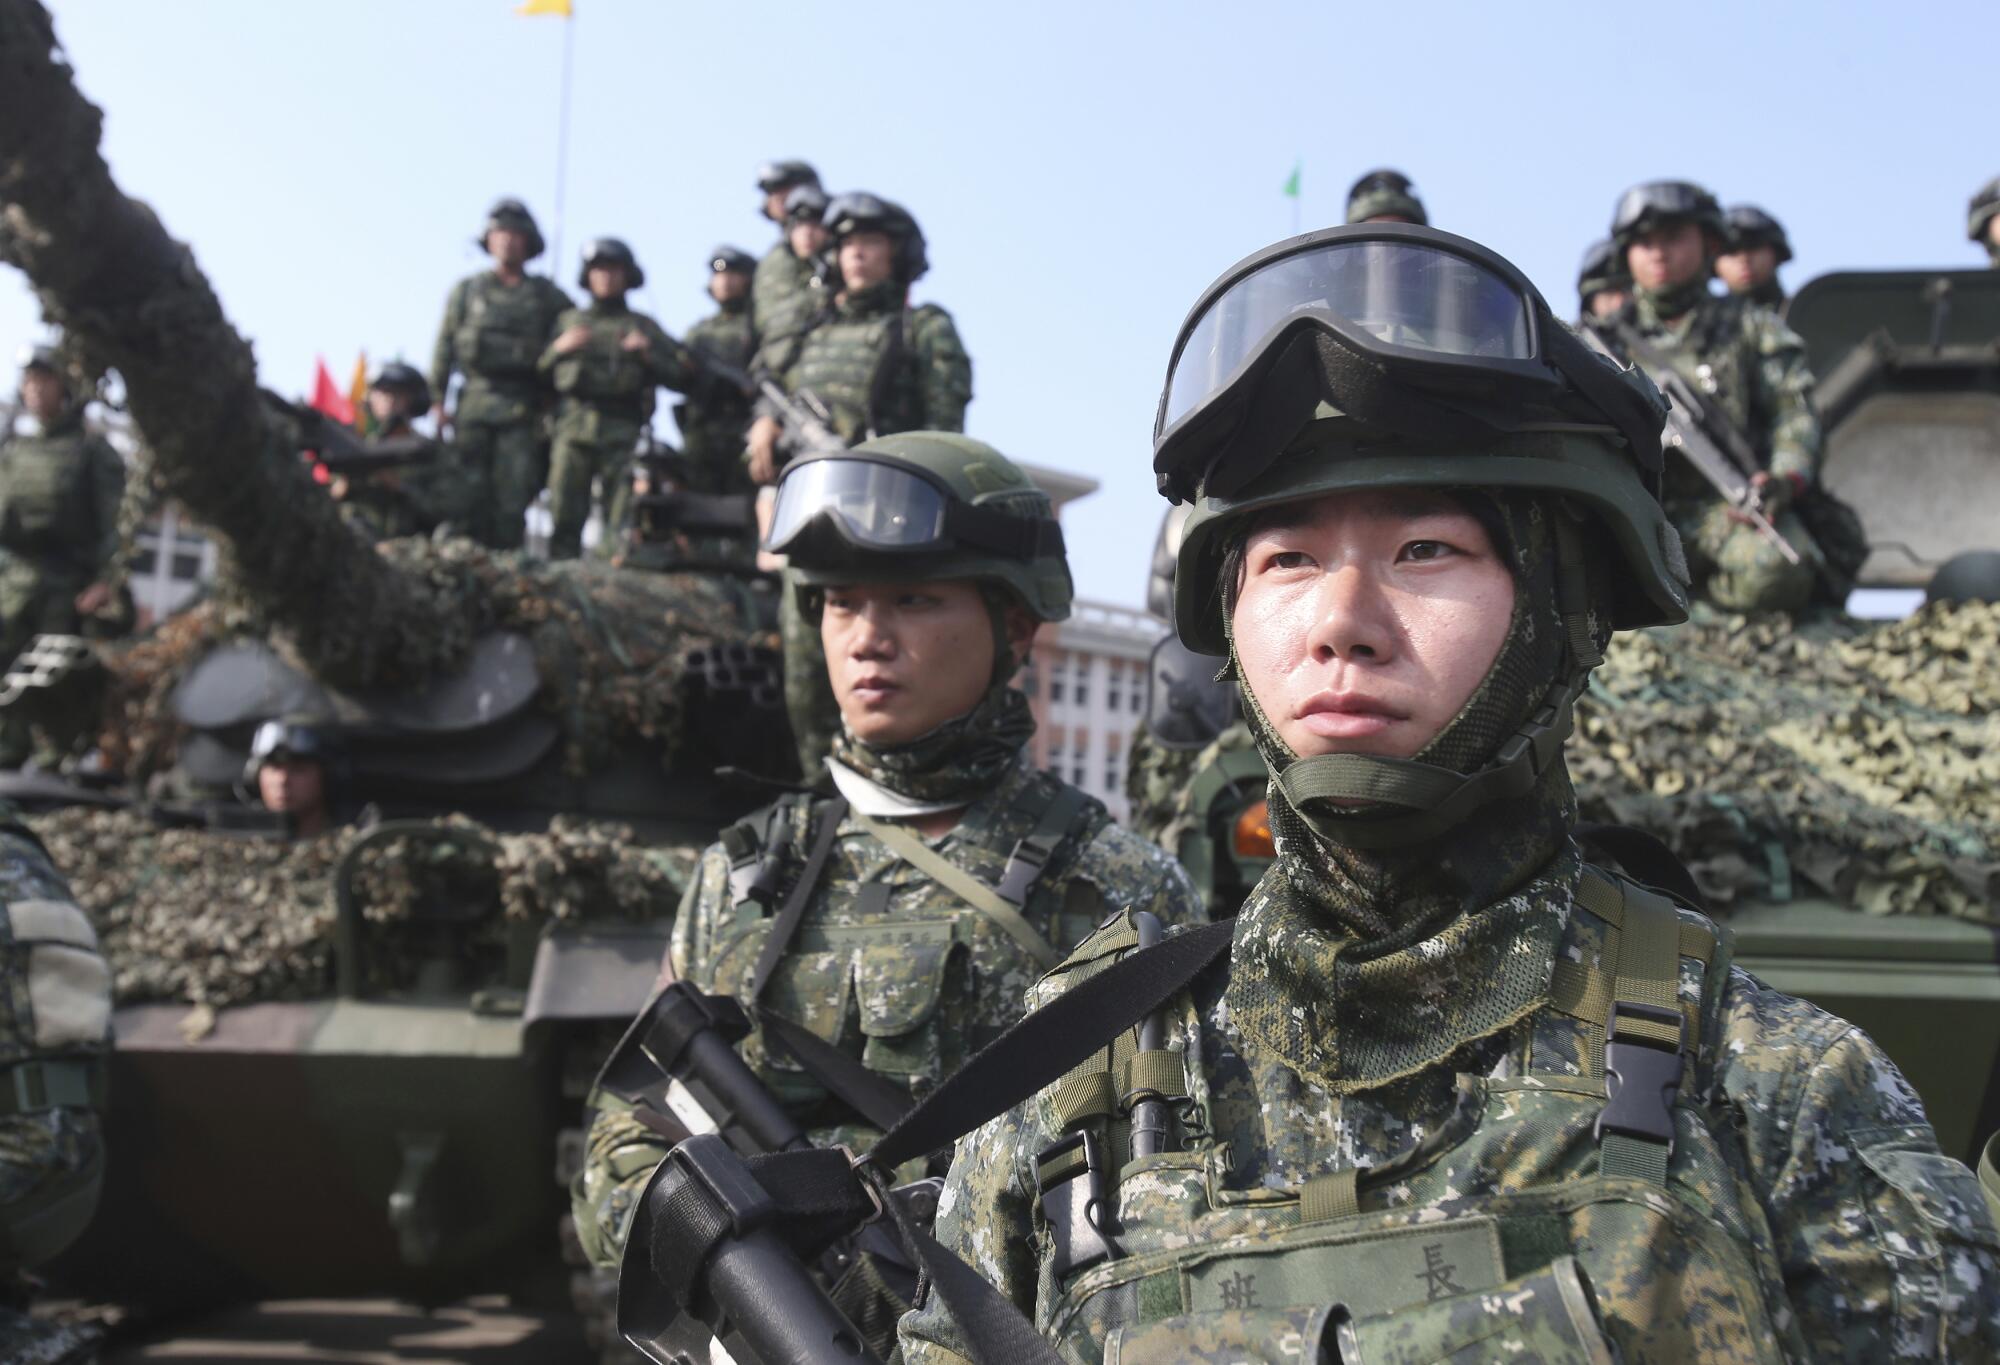 Taiwan's active-duty military has shrunk to 165,000 from 275,000 three years ago.